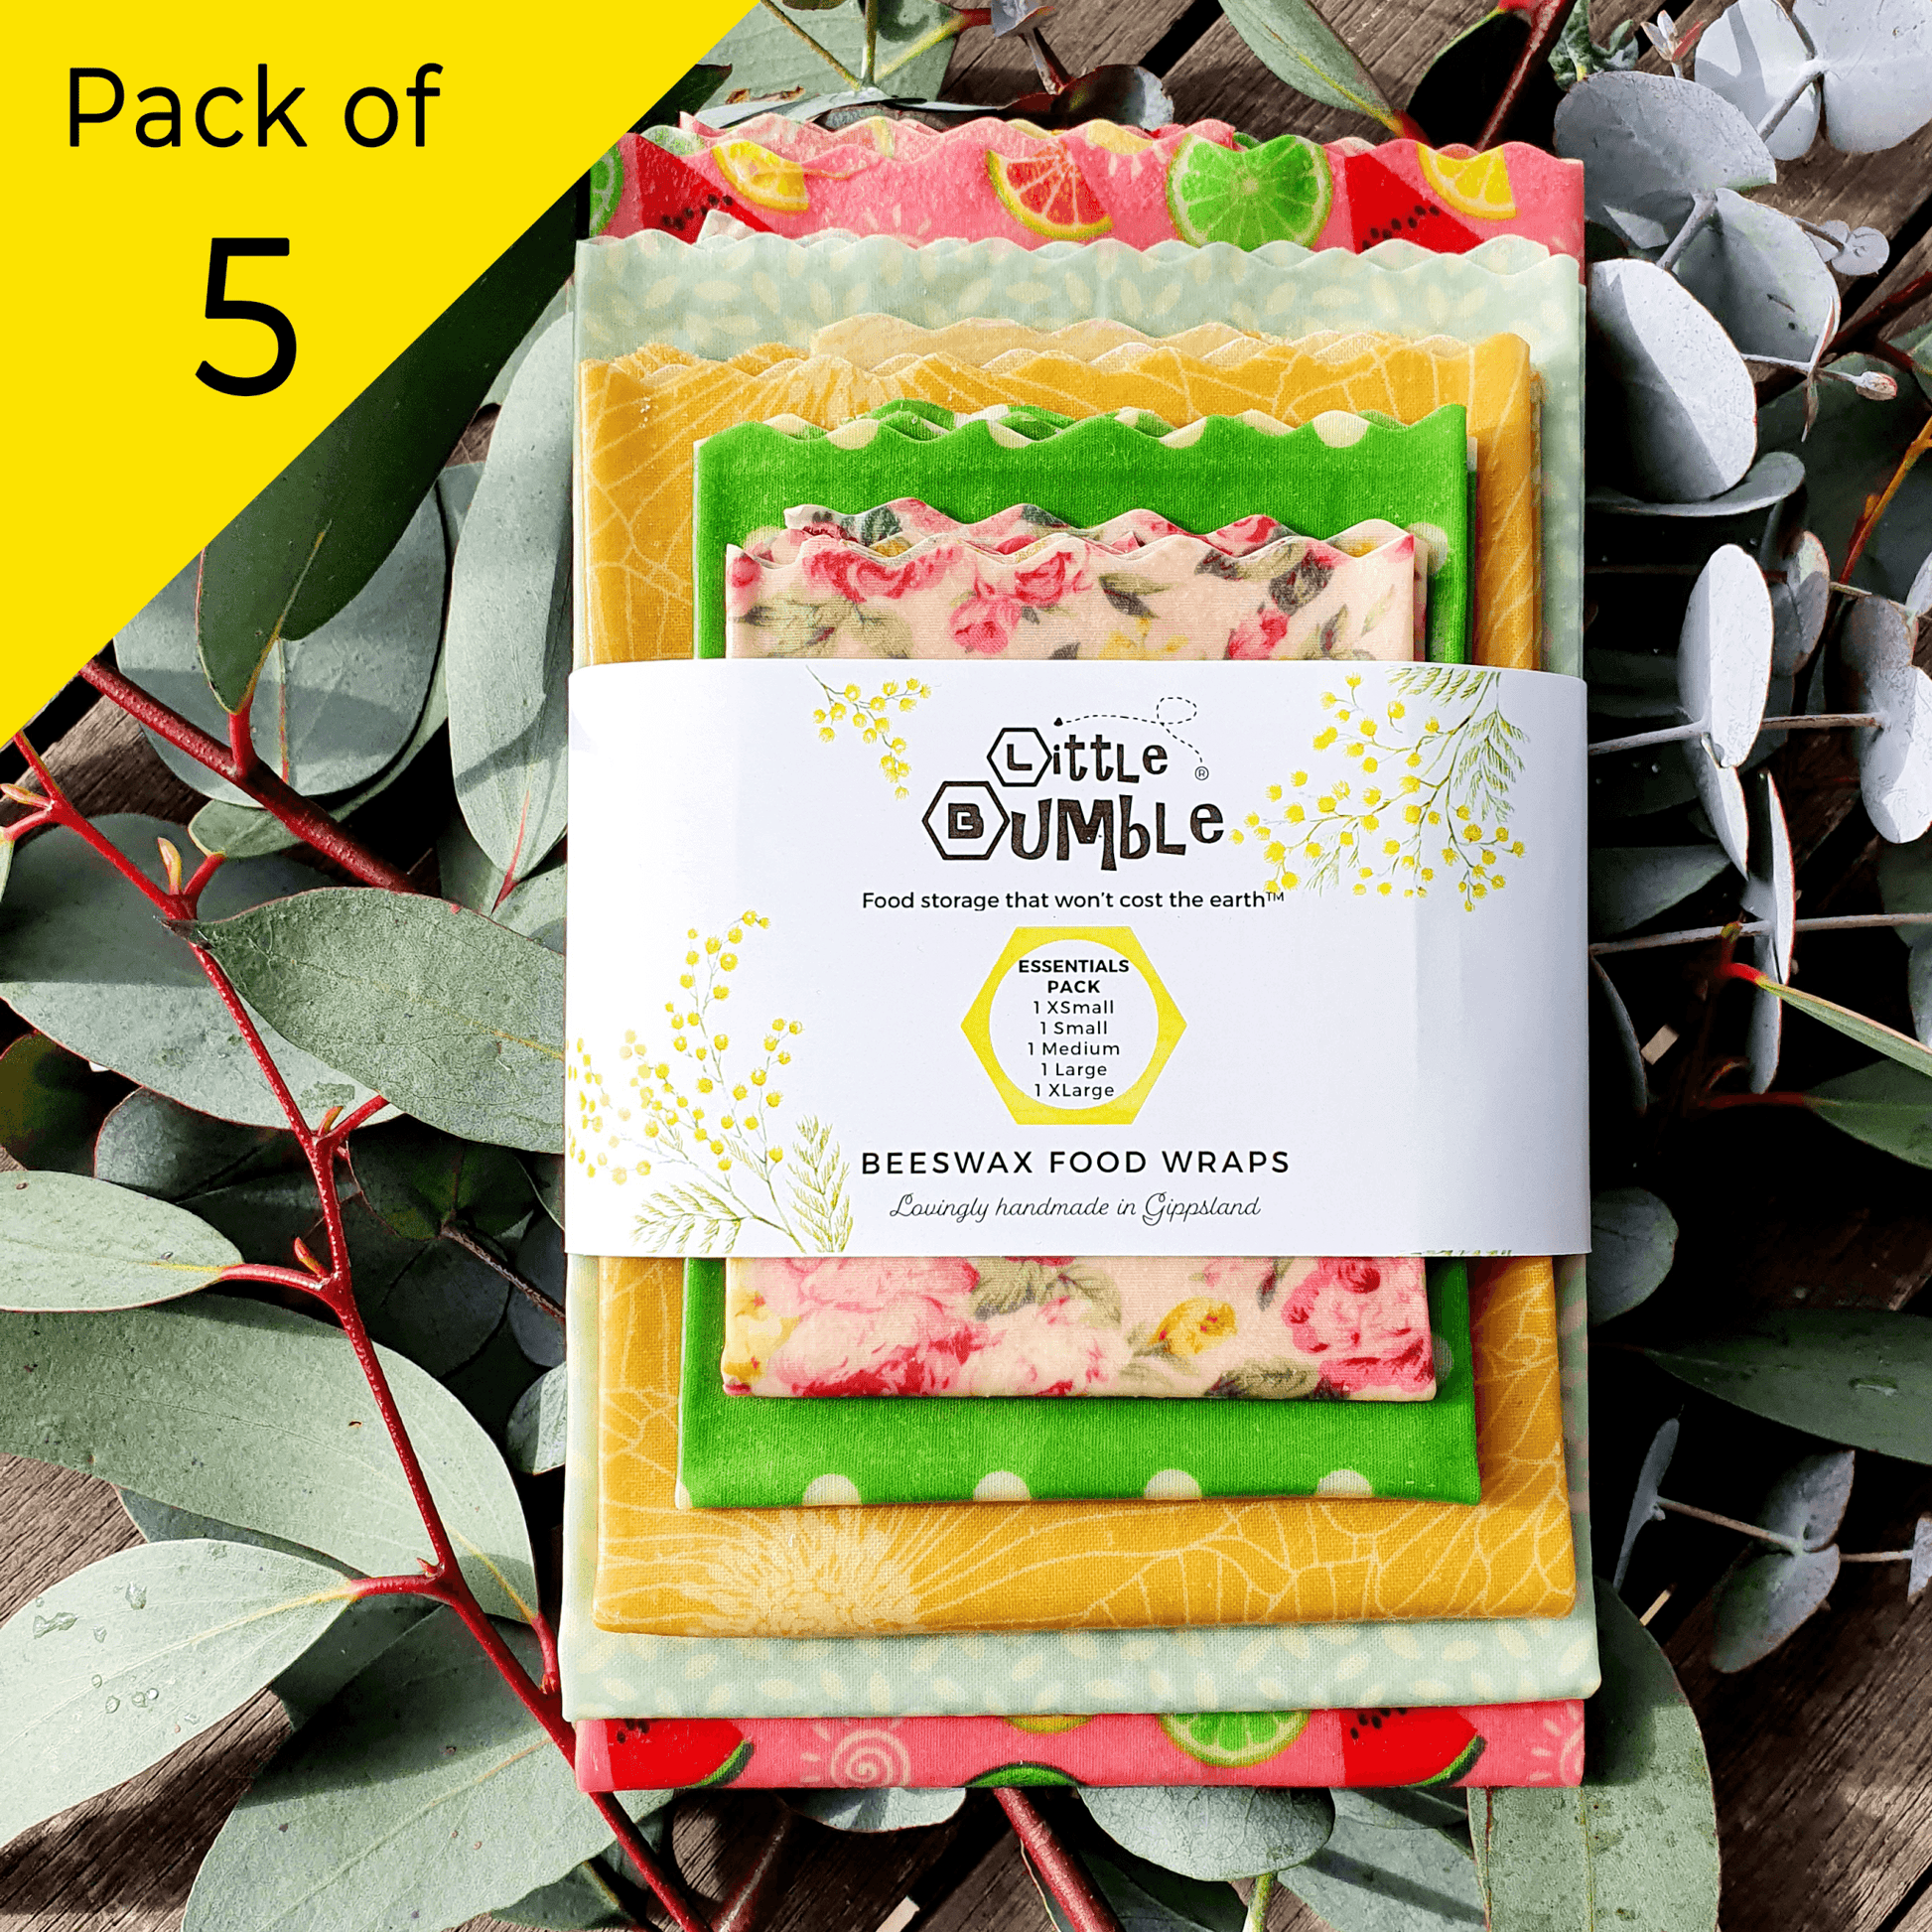 Essentials Pack (Everyday set) - 5 beeswax wraps ideal for every household, wrap avos through to celery! - Little Bumble Reusable Food Wraps